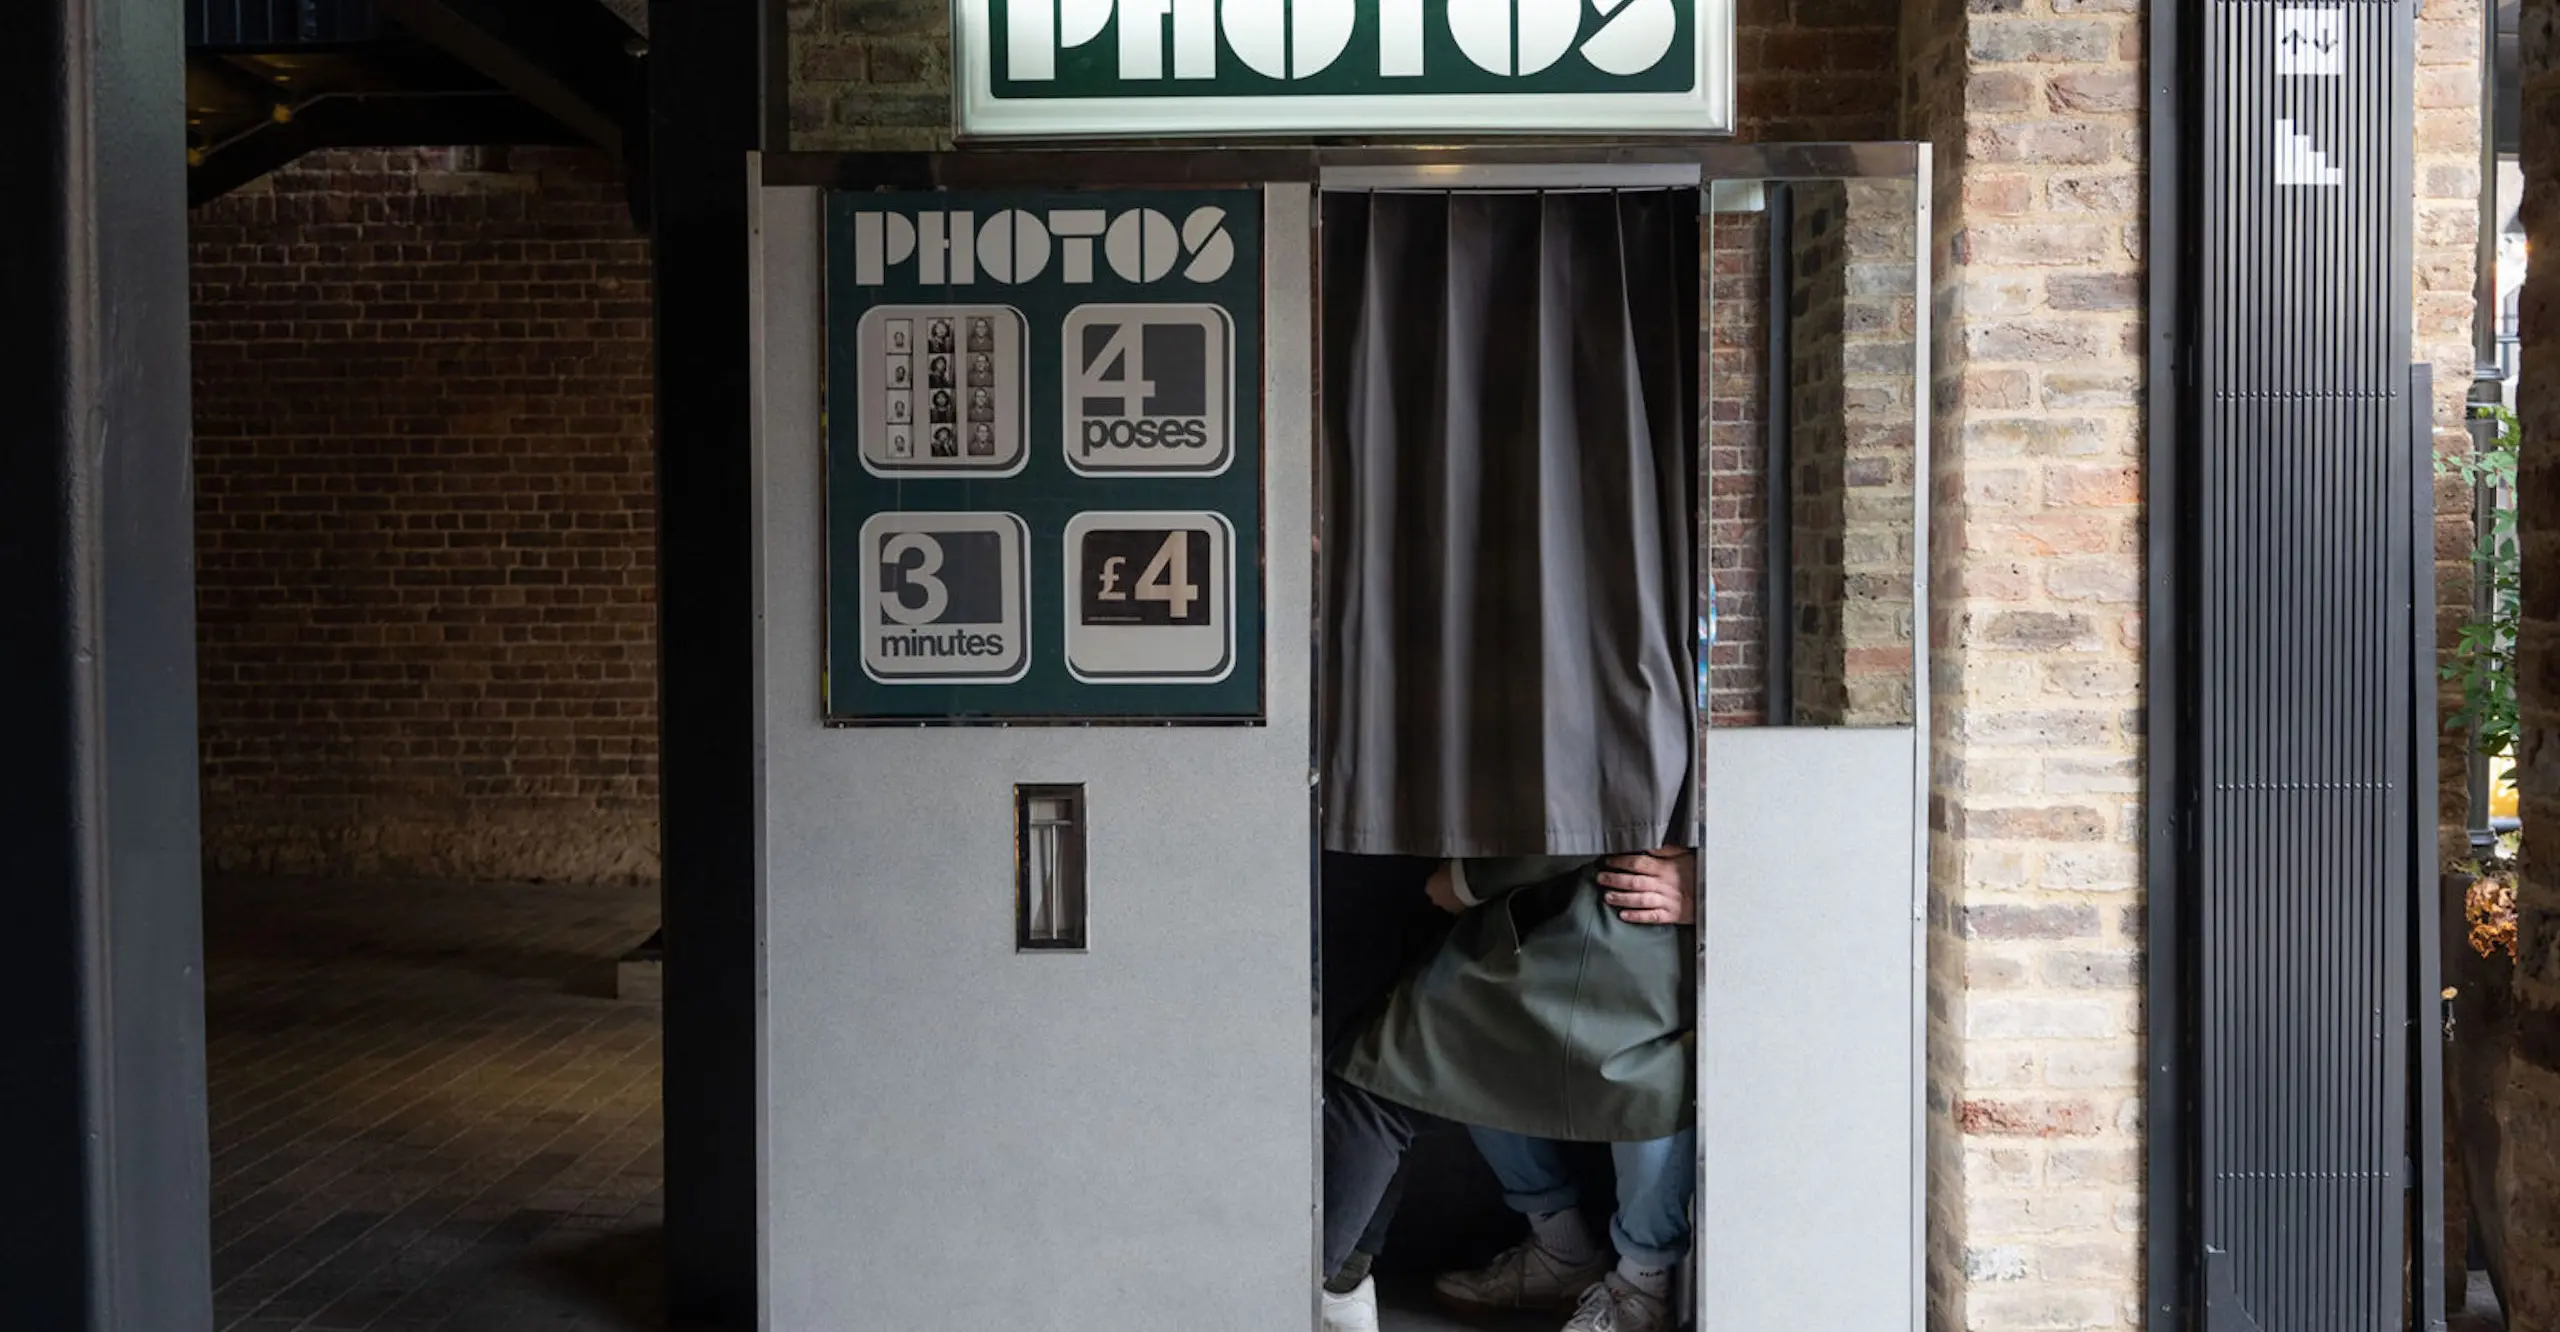 The knees and feet of two people sit behind the curtain of an outdoor photobooth.